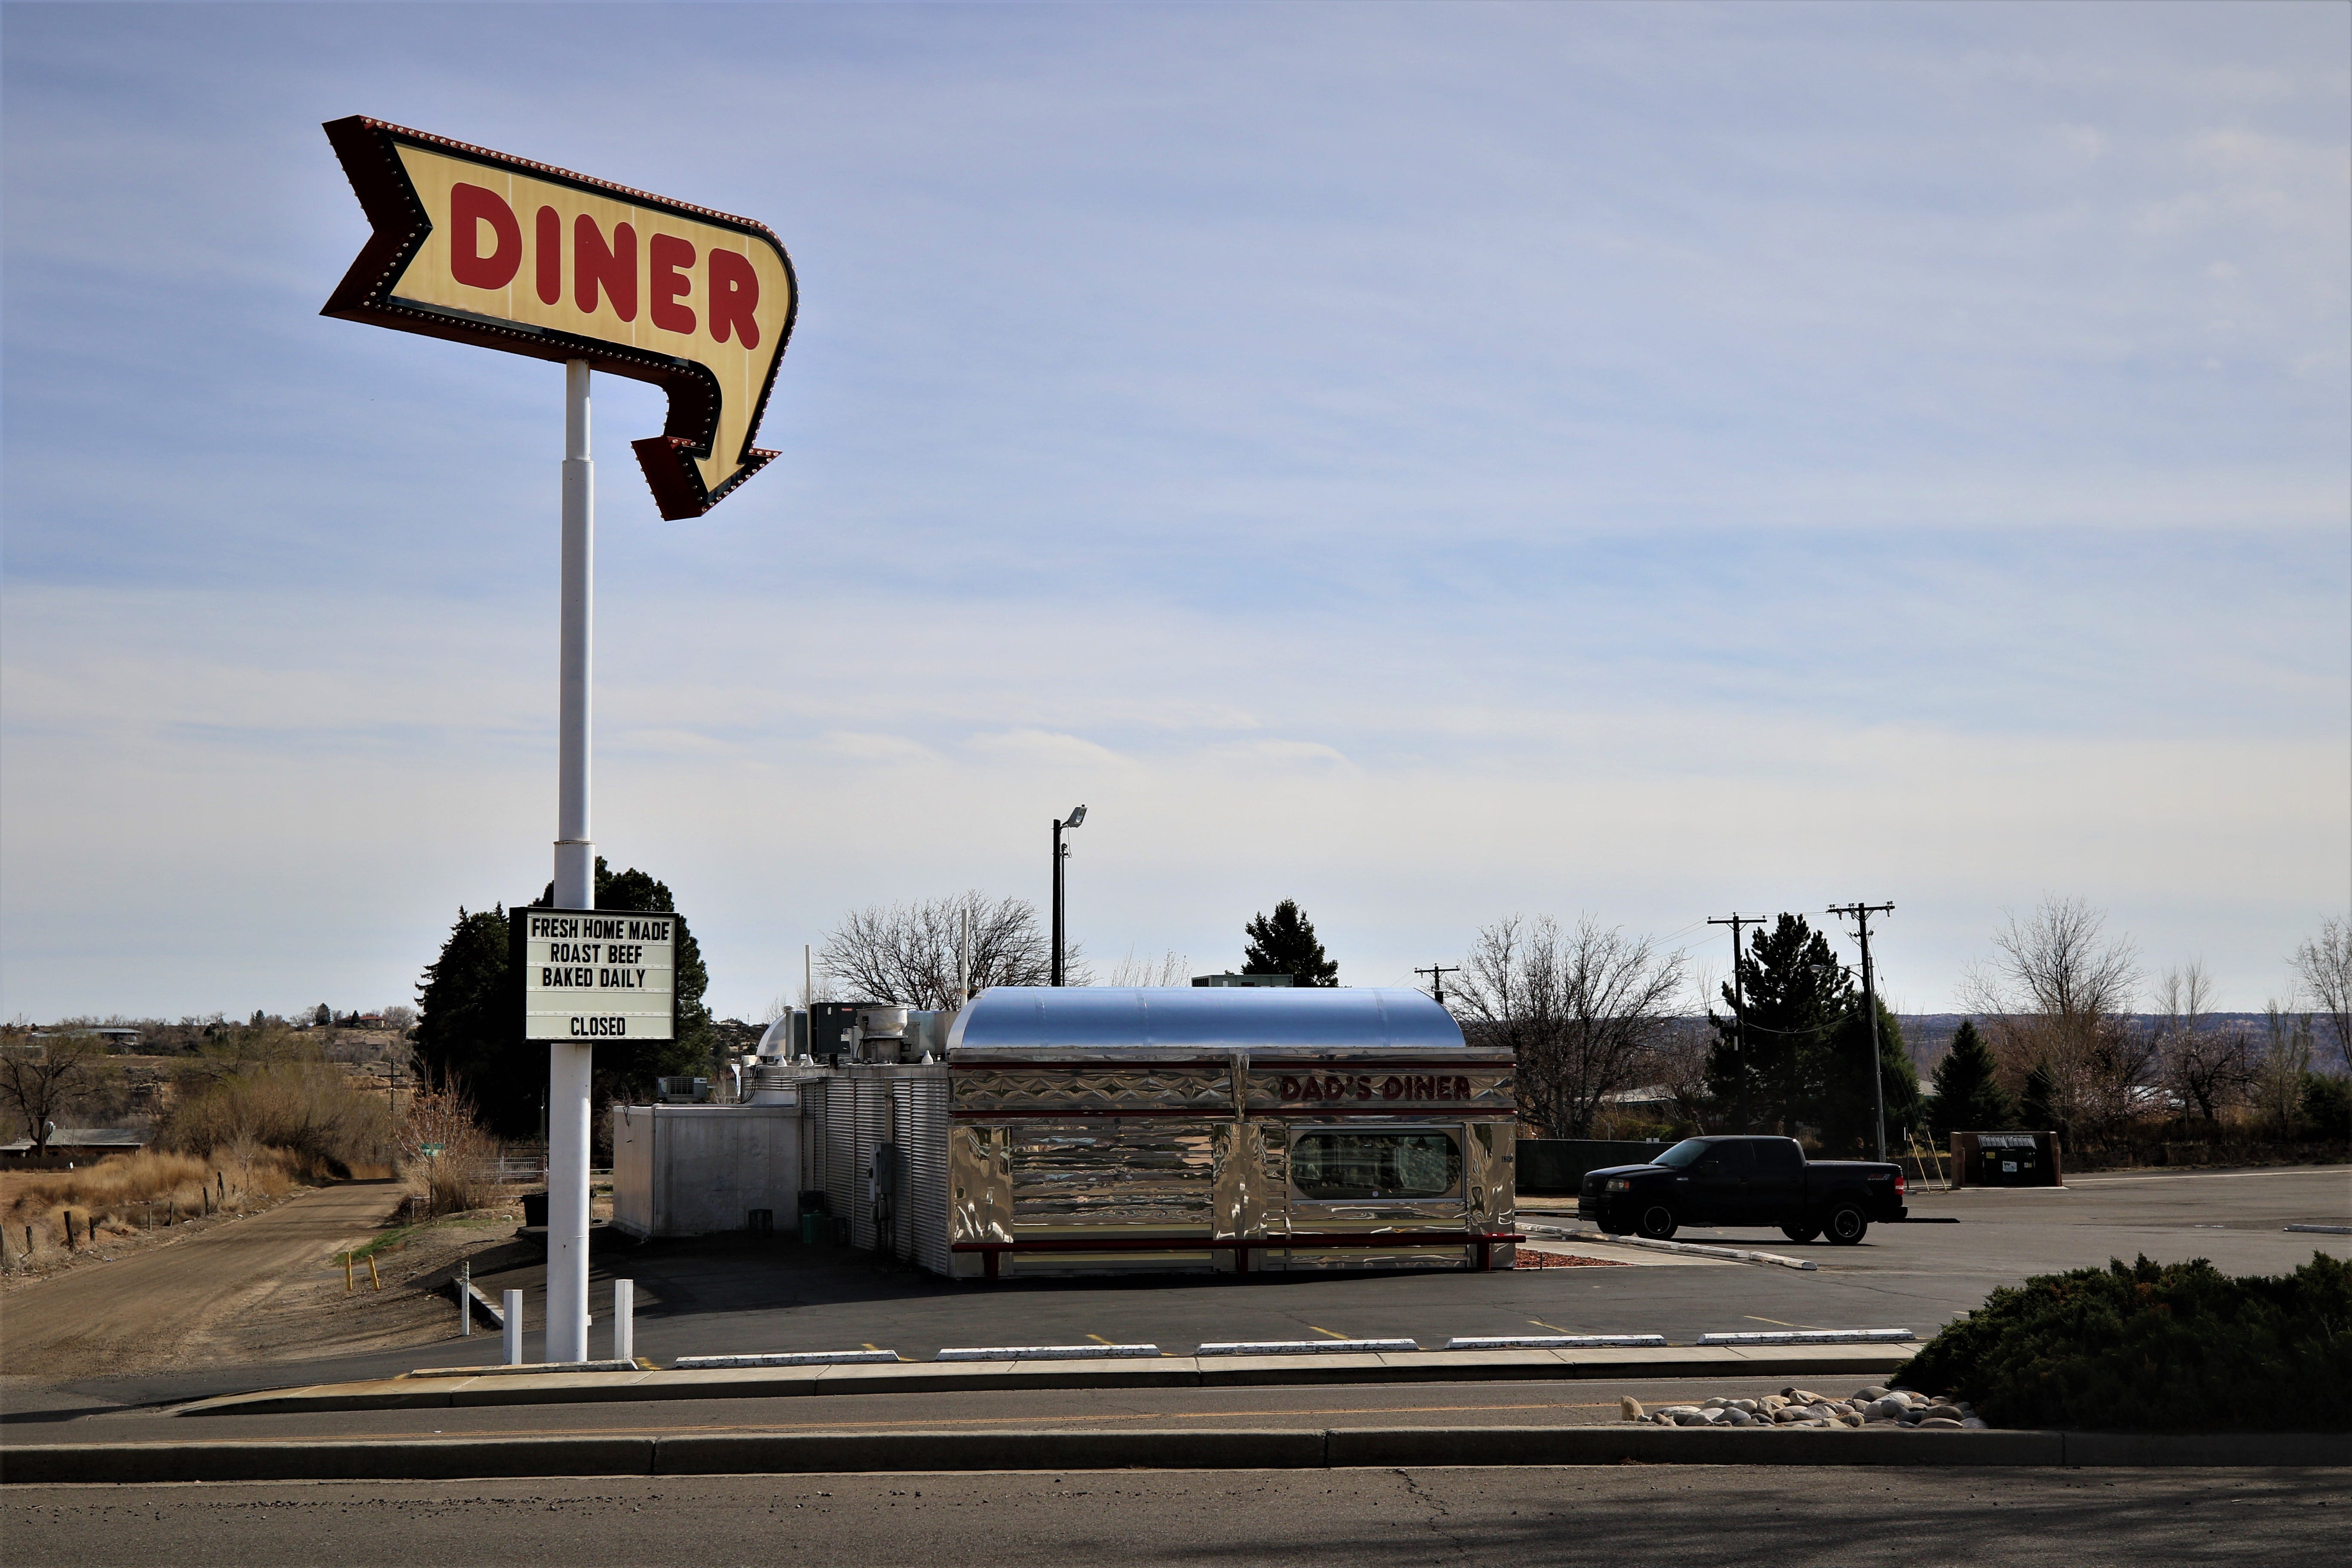 Dad's Diner in Farmington is just one New Mexico restaurant that has been negatively impacted by the coronavirus shutdown, but an Albuquerque-based organization is trying to help industry workers who have lost their jobs.